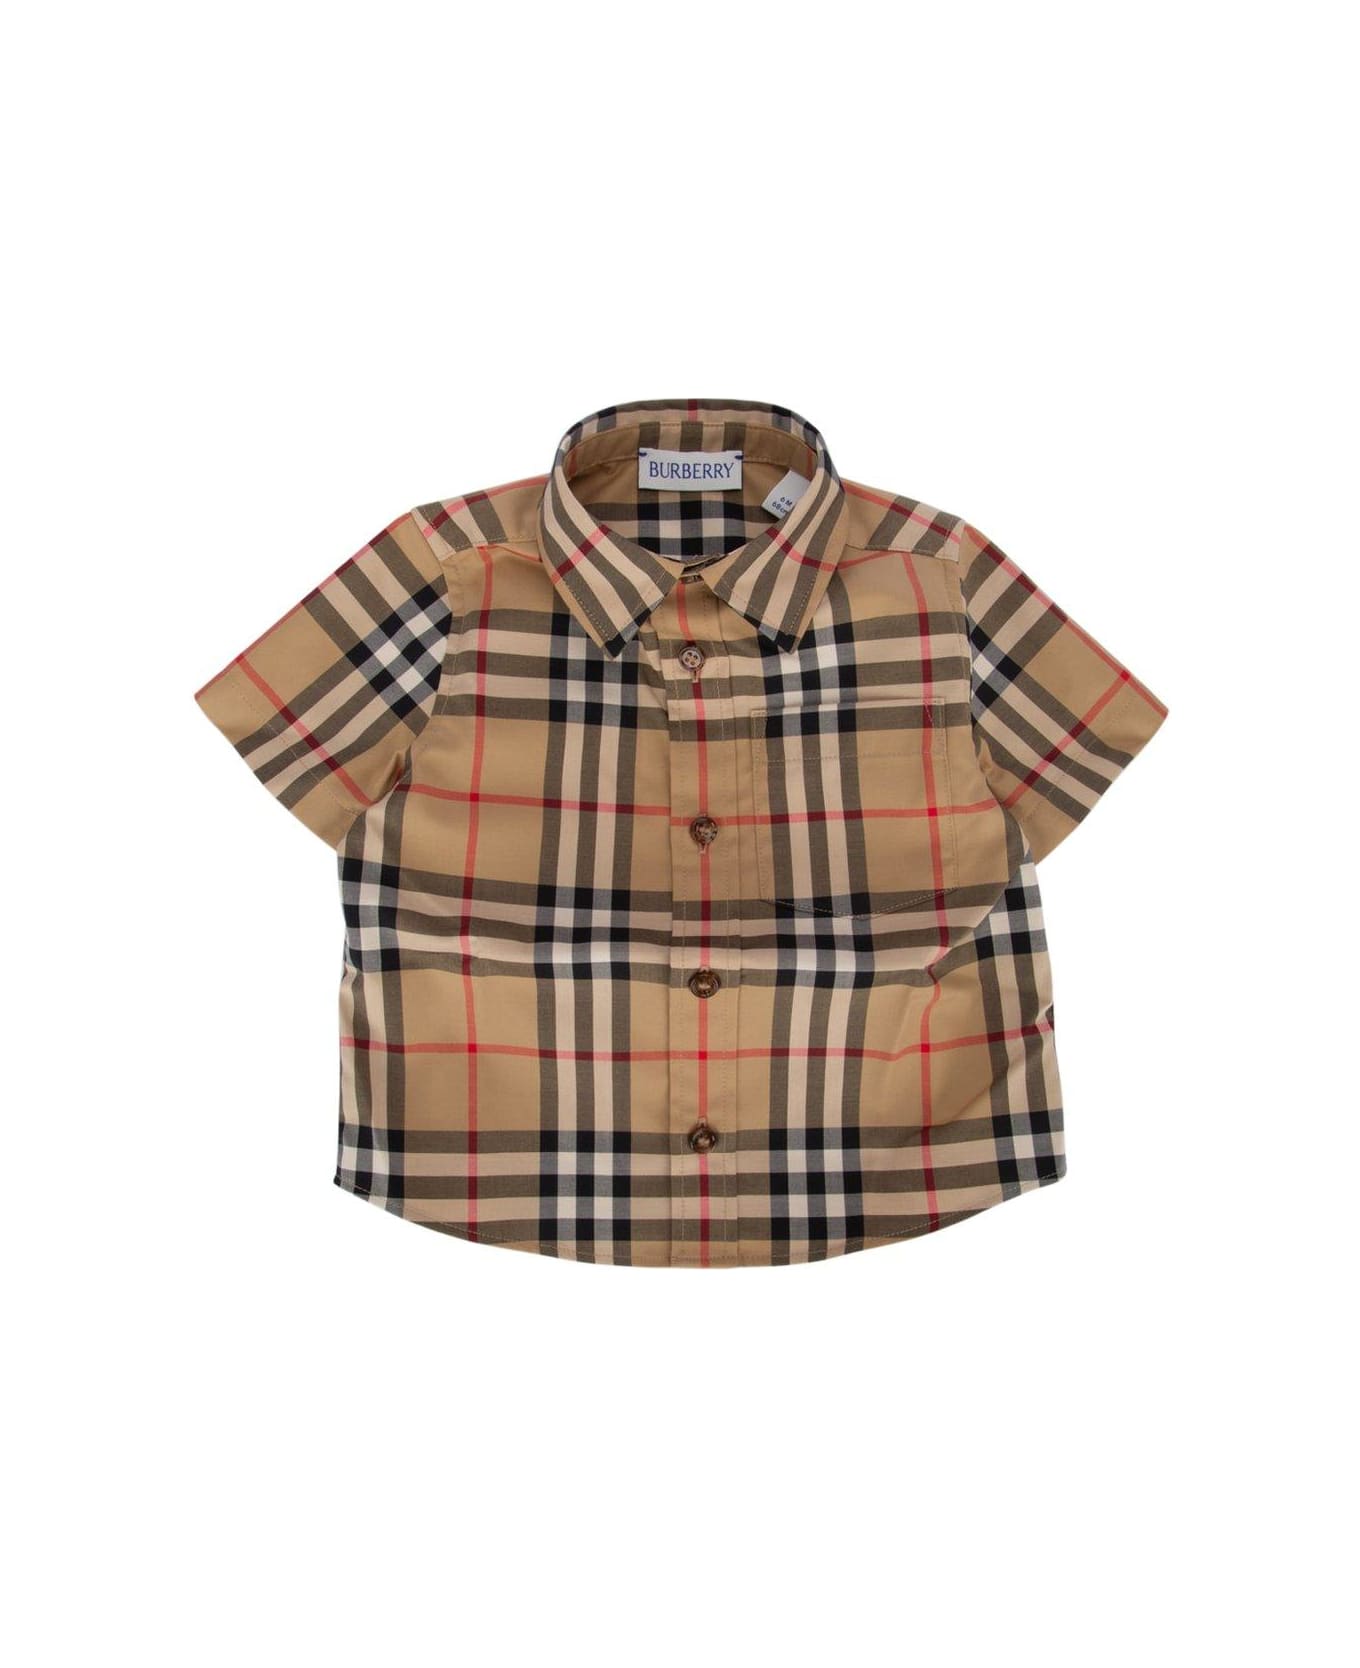 Burberry Check Pattern Short-sleeved Shirt - Archive beige ip chk シャツ